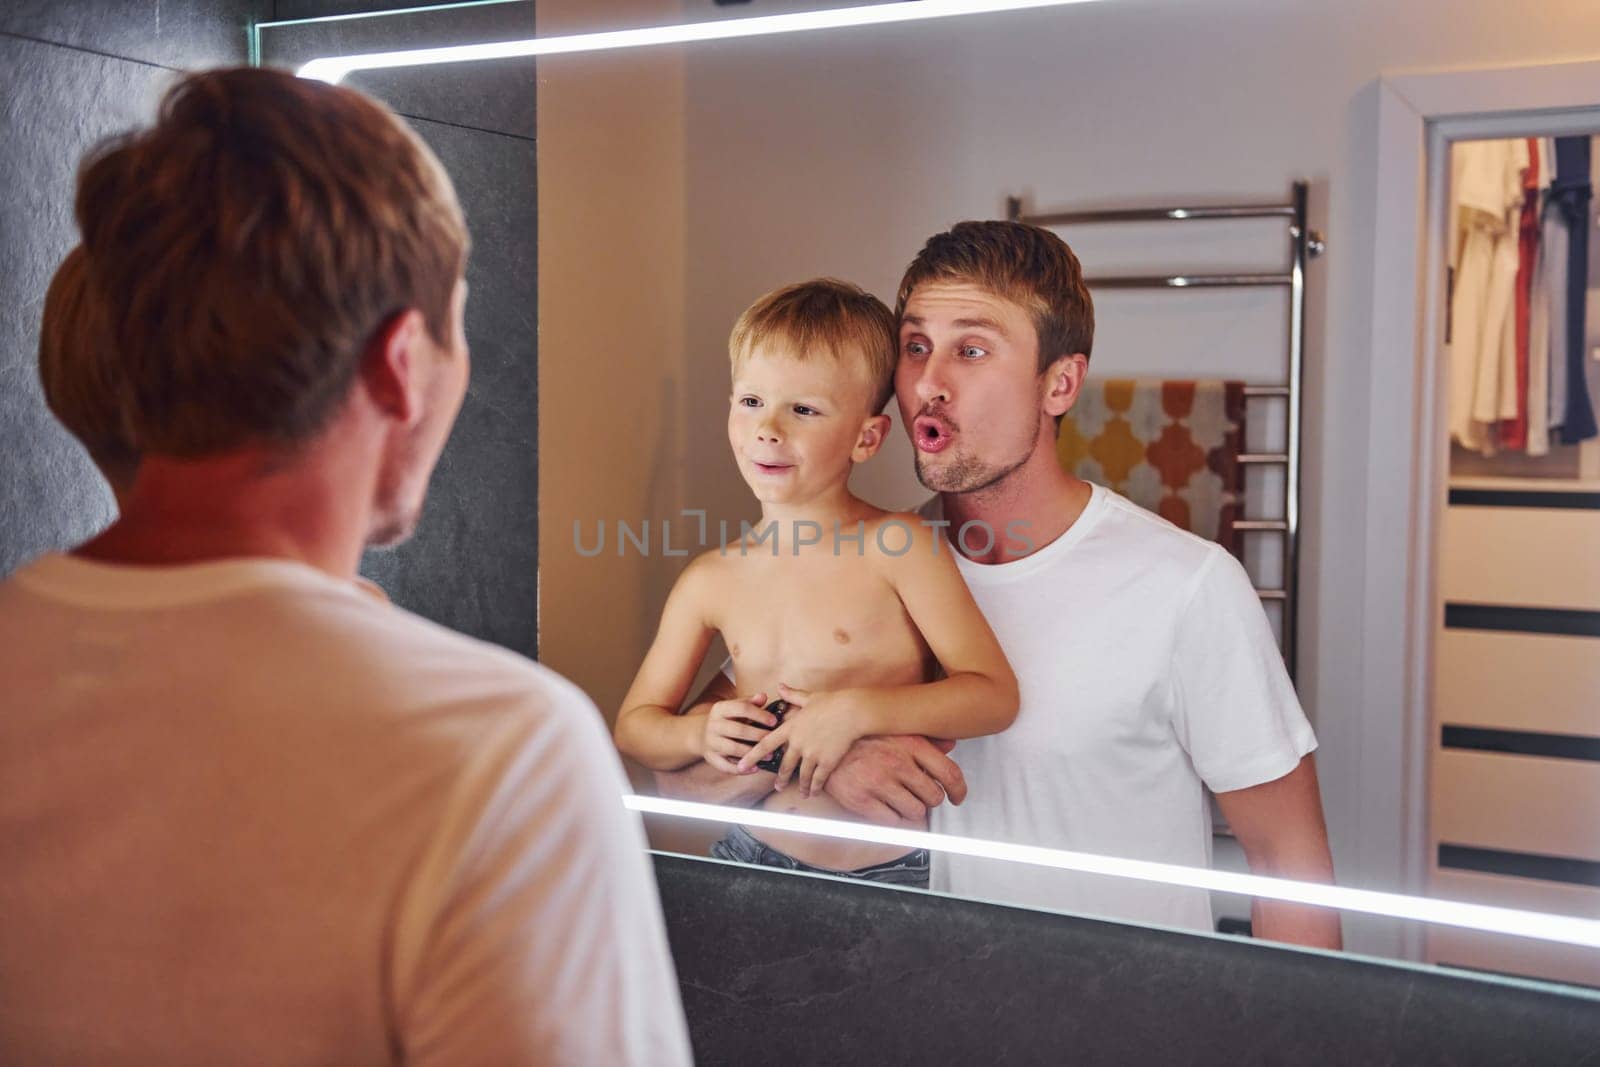 Looking in the mirror in bathroom. Father and son is indoors at home together by Standret